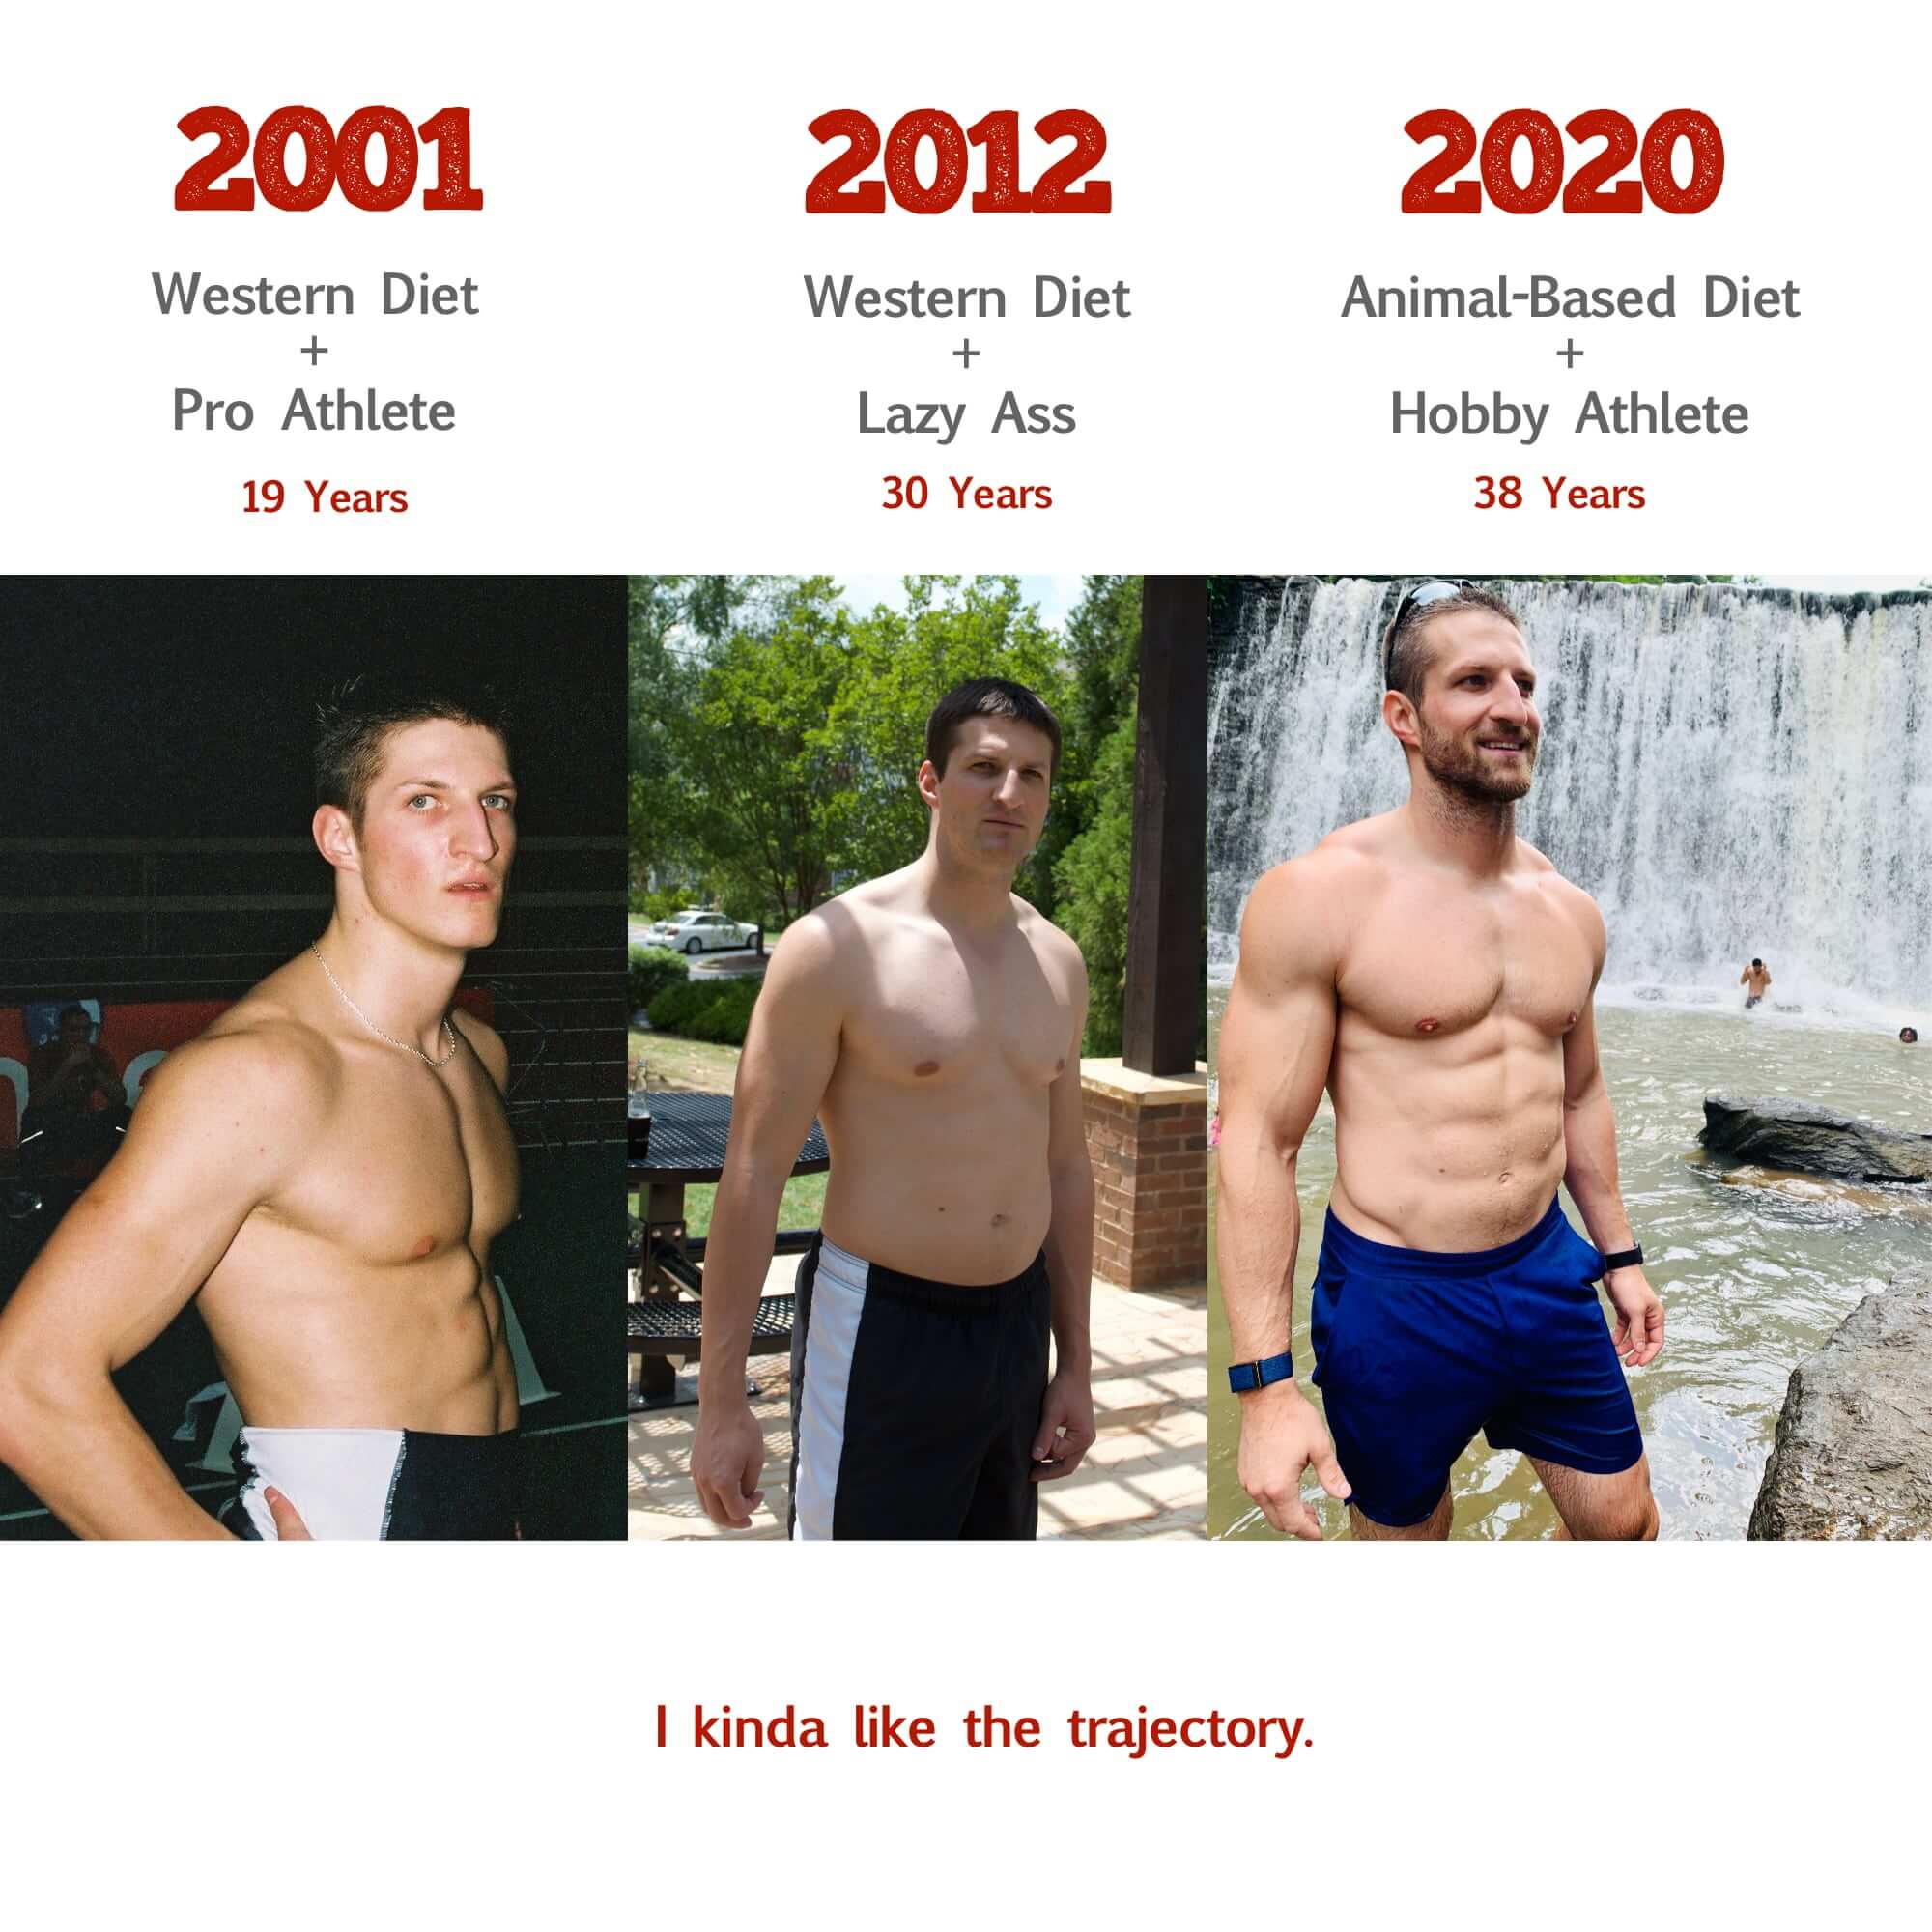 While I appeared to be healthy in my early twenties, neither my immune system nor my metabolism were working optimally.